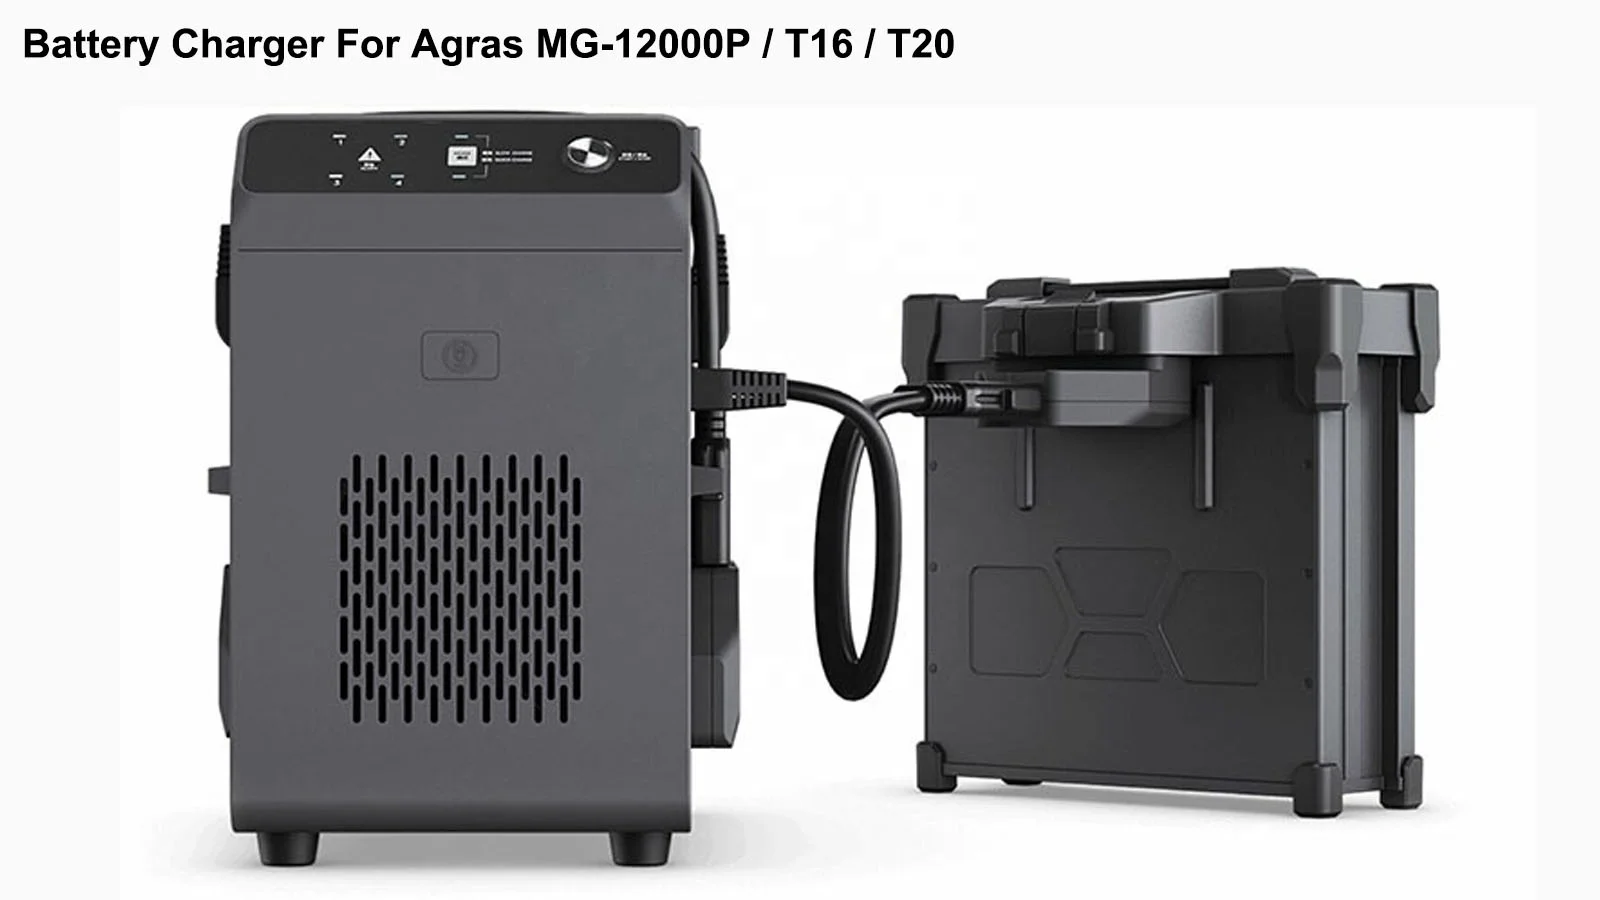 Original Agras T16 T20 Agriculture Drone Sprayer 2600W 4 Channel Intelligent For Mg-1P Mg-1 Agras T16 T20 Battery Charger